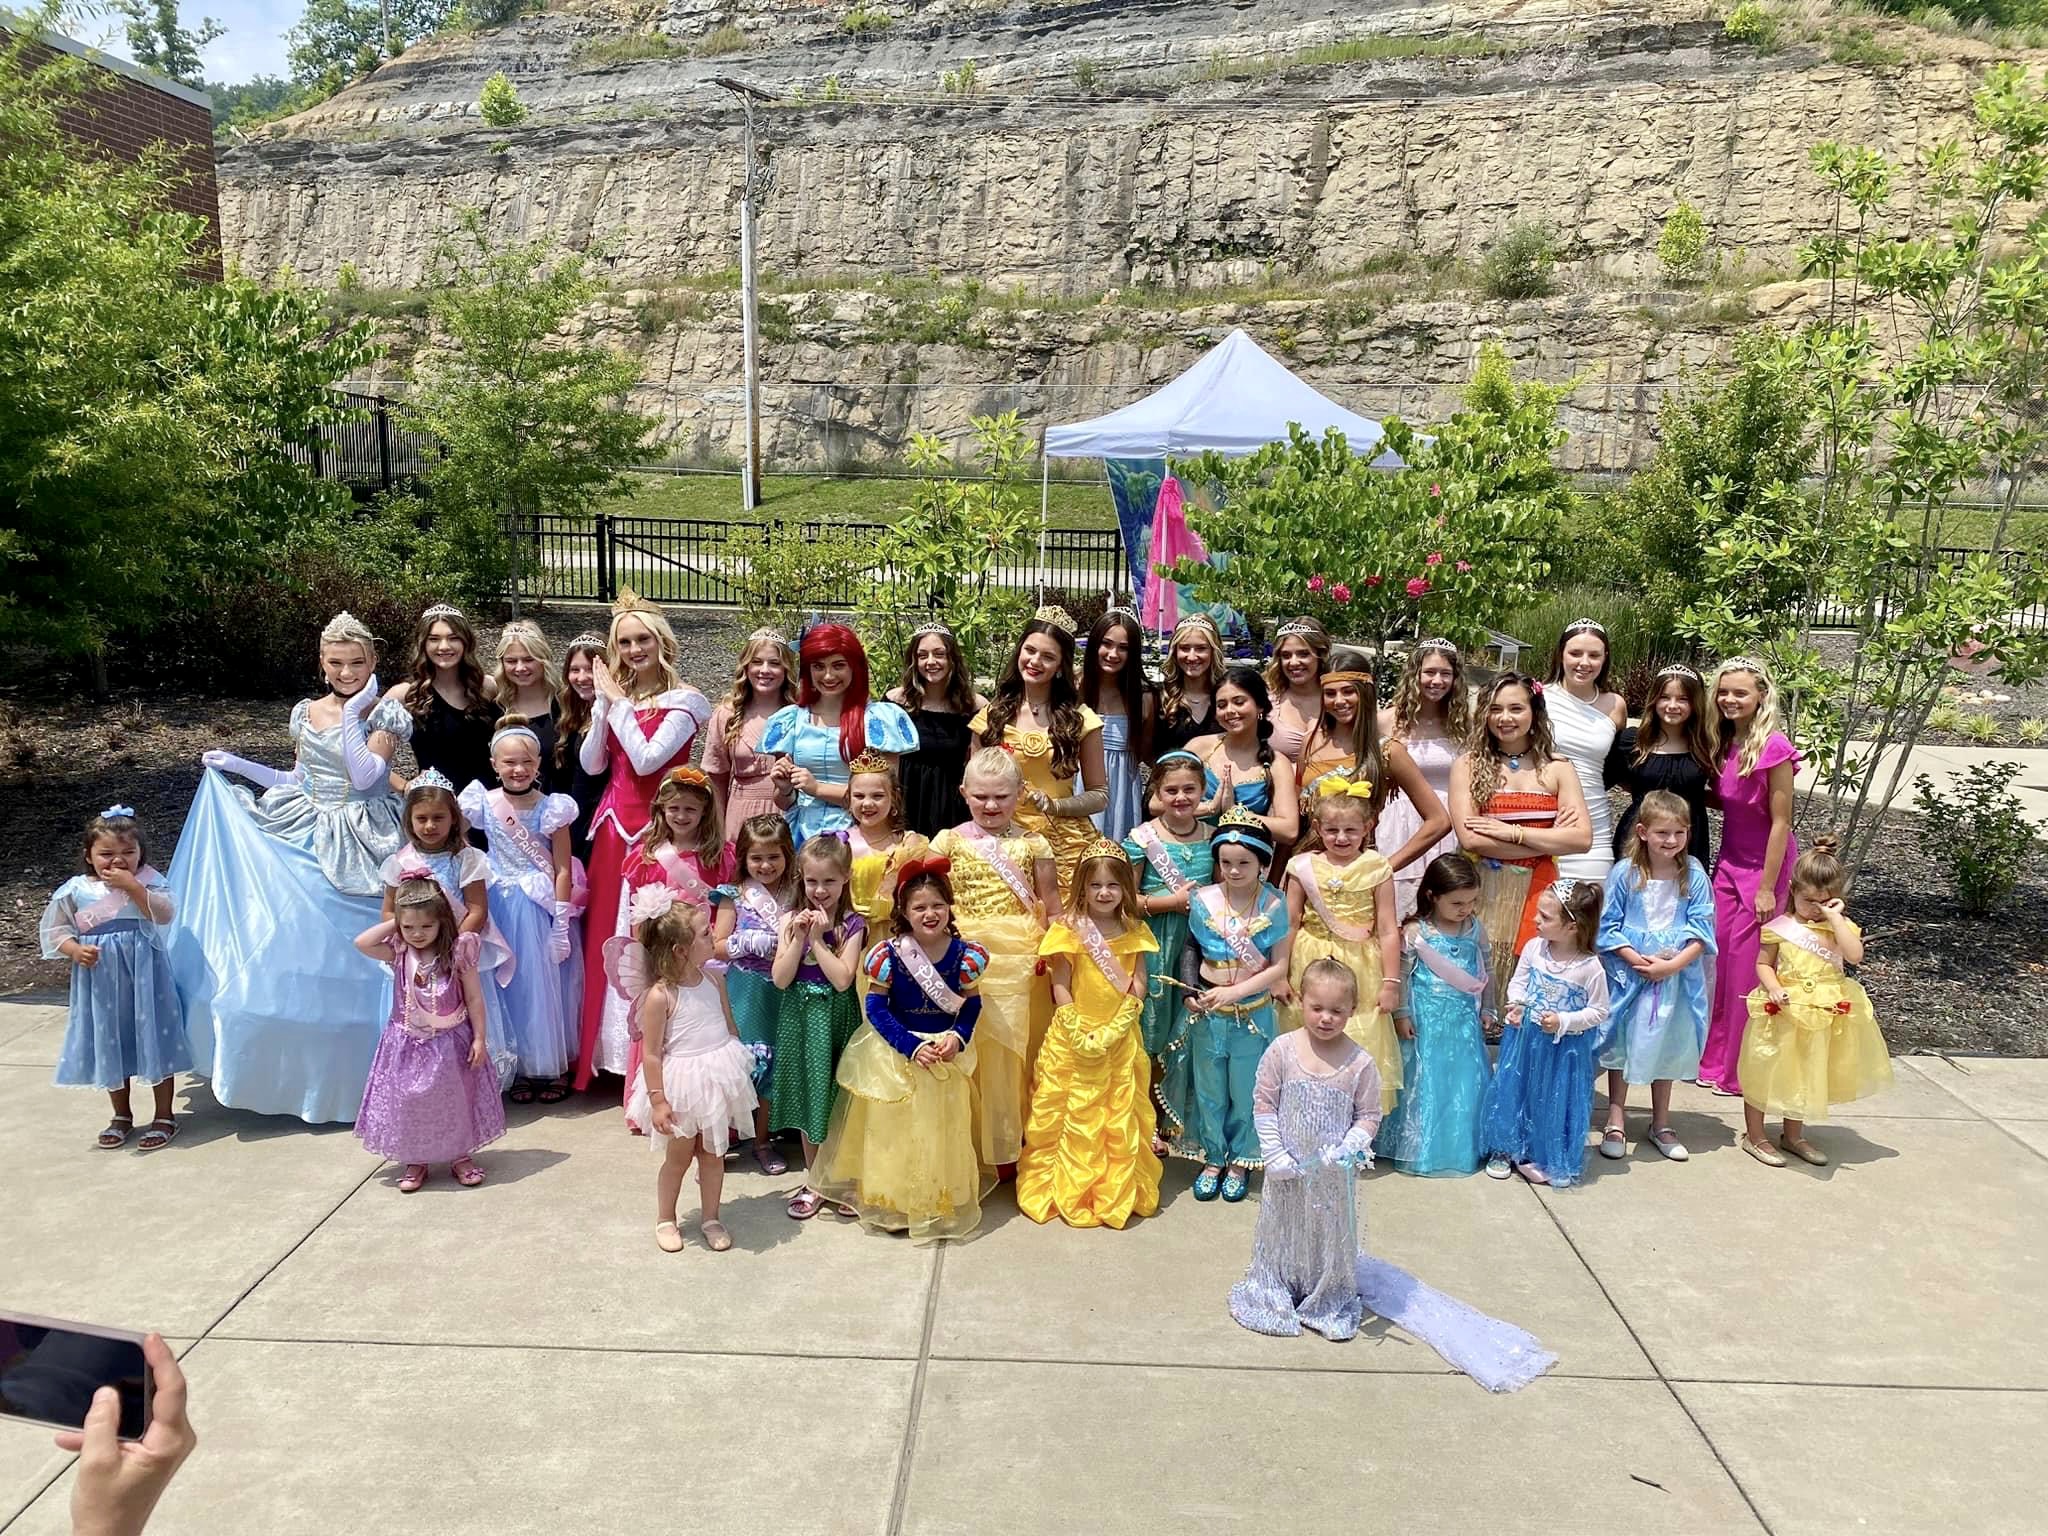 ‘A Princess Party’ unfolds unforgettable day of enchantment